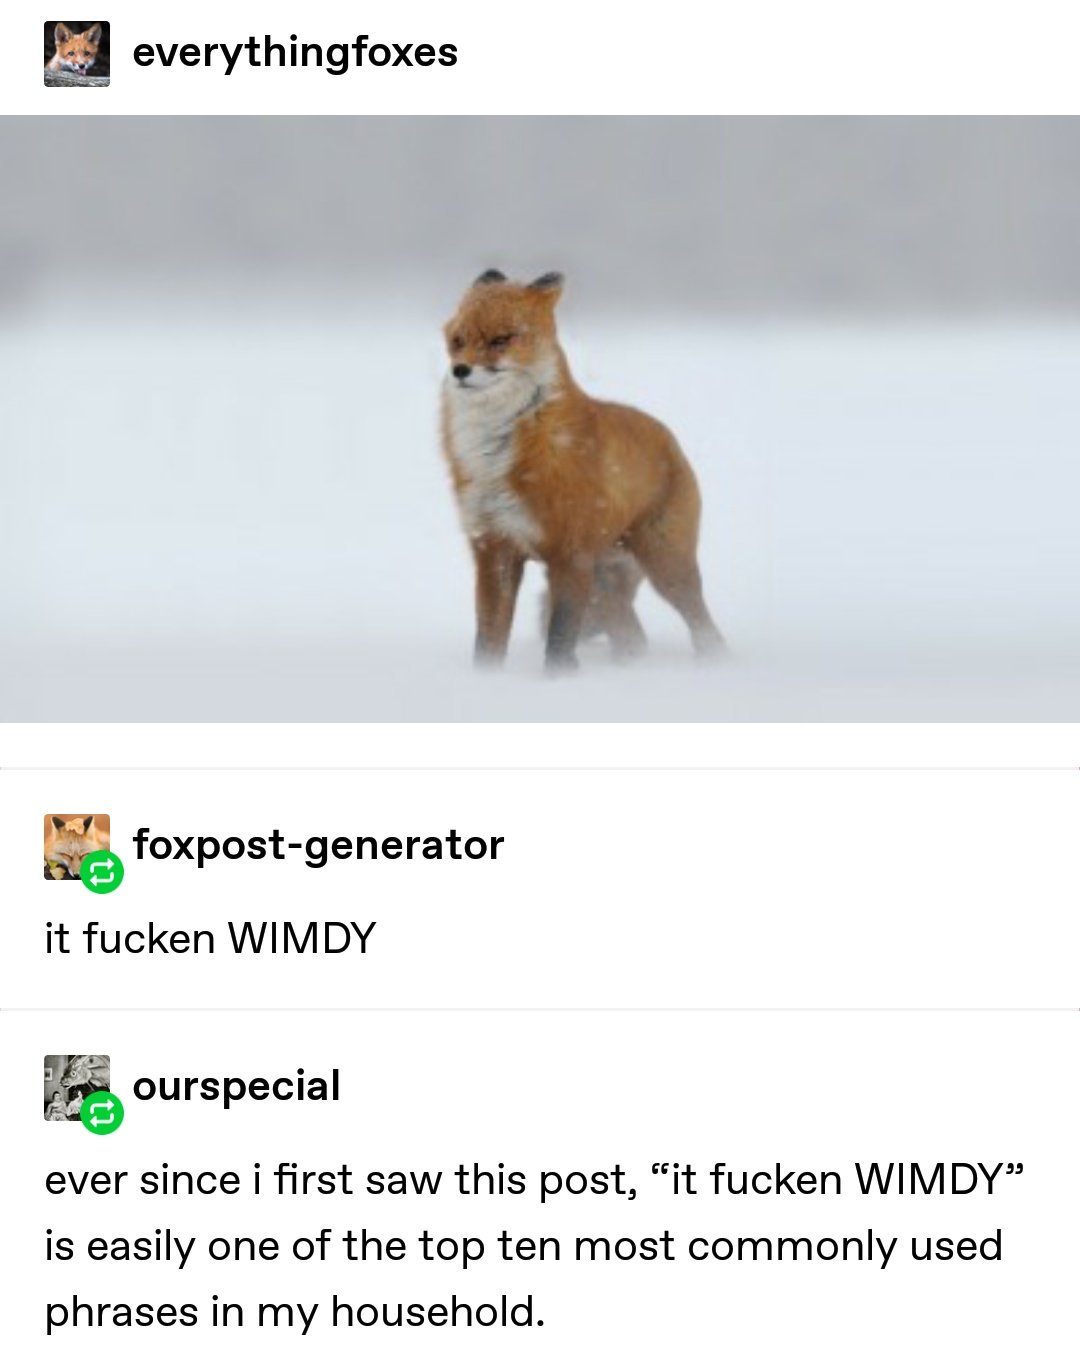 its fucken wimdy - everythingfoxes Cs foxpostgenerator it fucken Wimdy nourspecial ever since i first saw this post, "it fucken Wimdy is easily one of the top ten most commonly used phrases in my household.